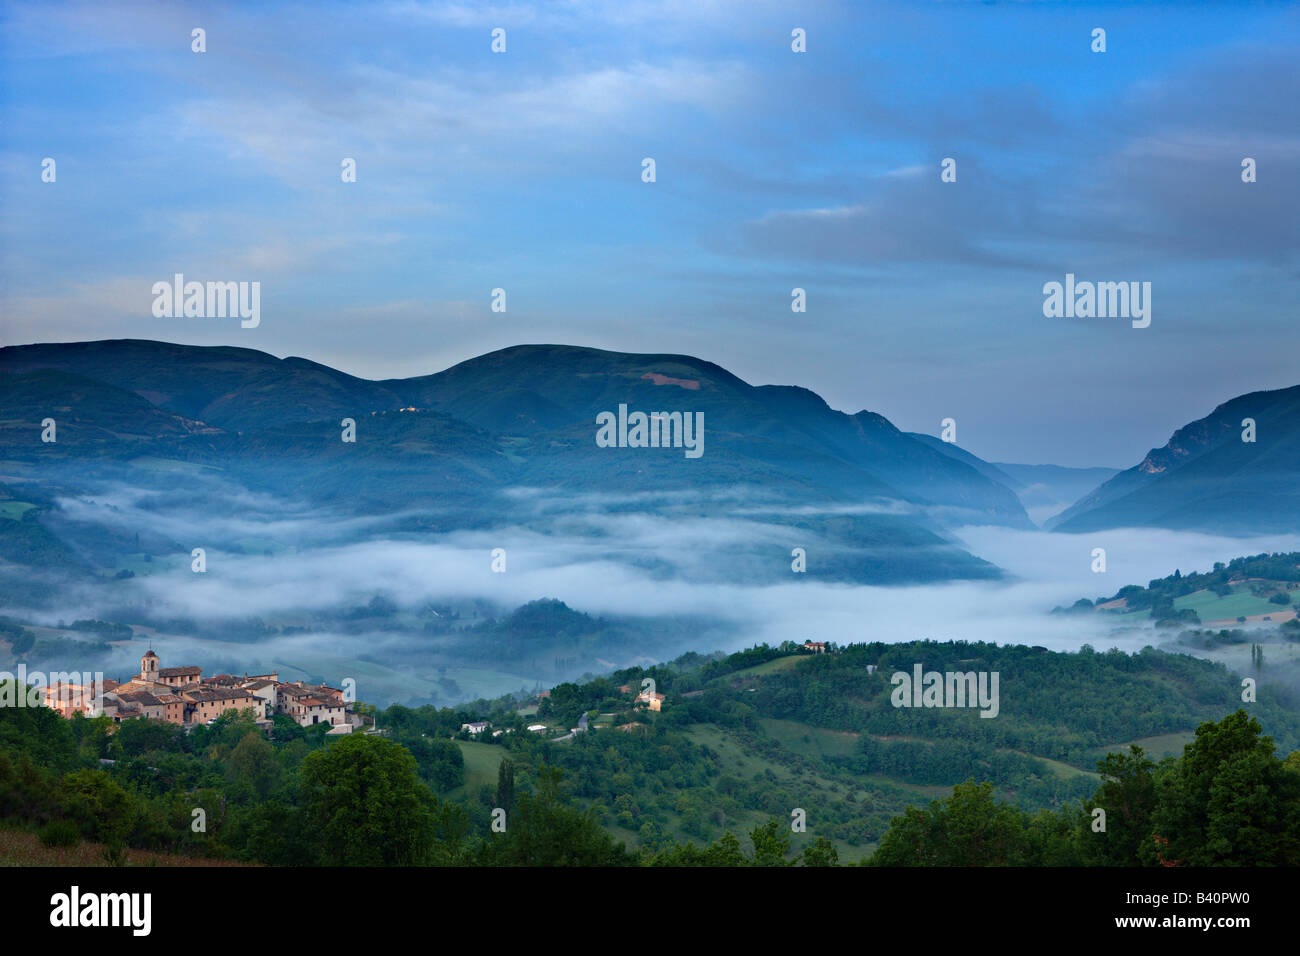 the village of Castelvecchio with mist lying in the Valnerina at dawn, Umbria, Italy Stock Photo